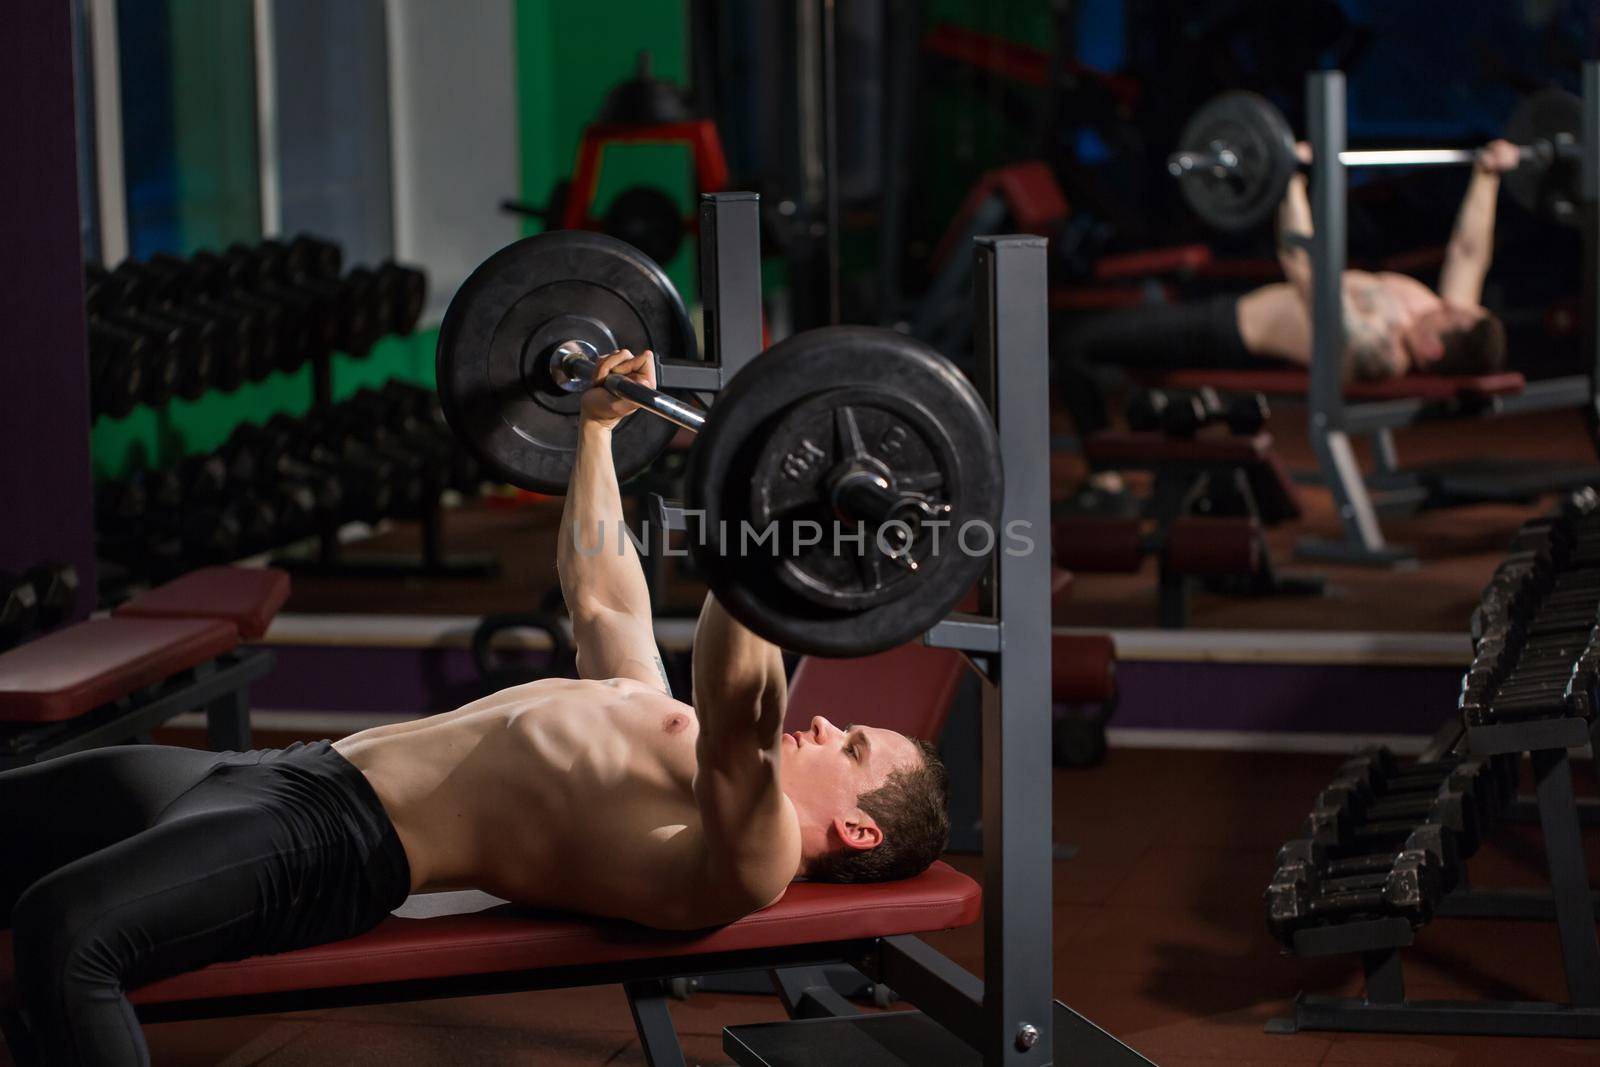 Brutal athletic man pumping up muscles on bench press